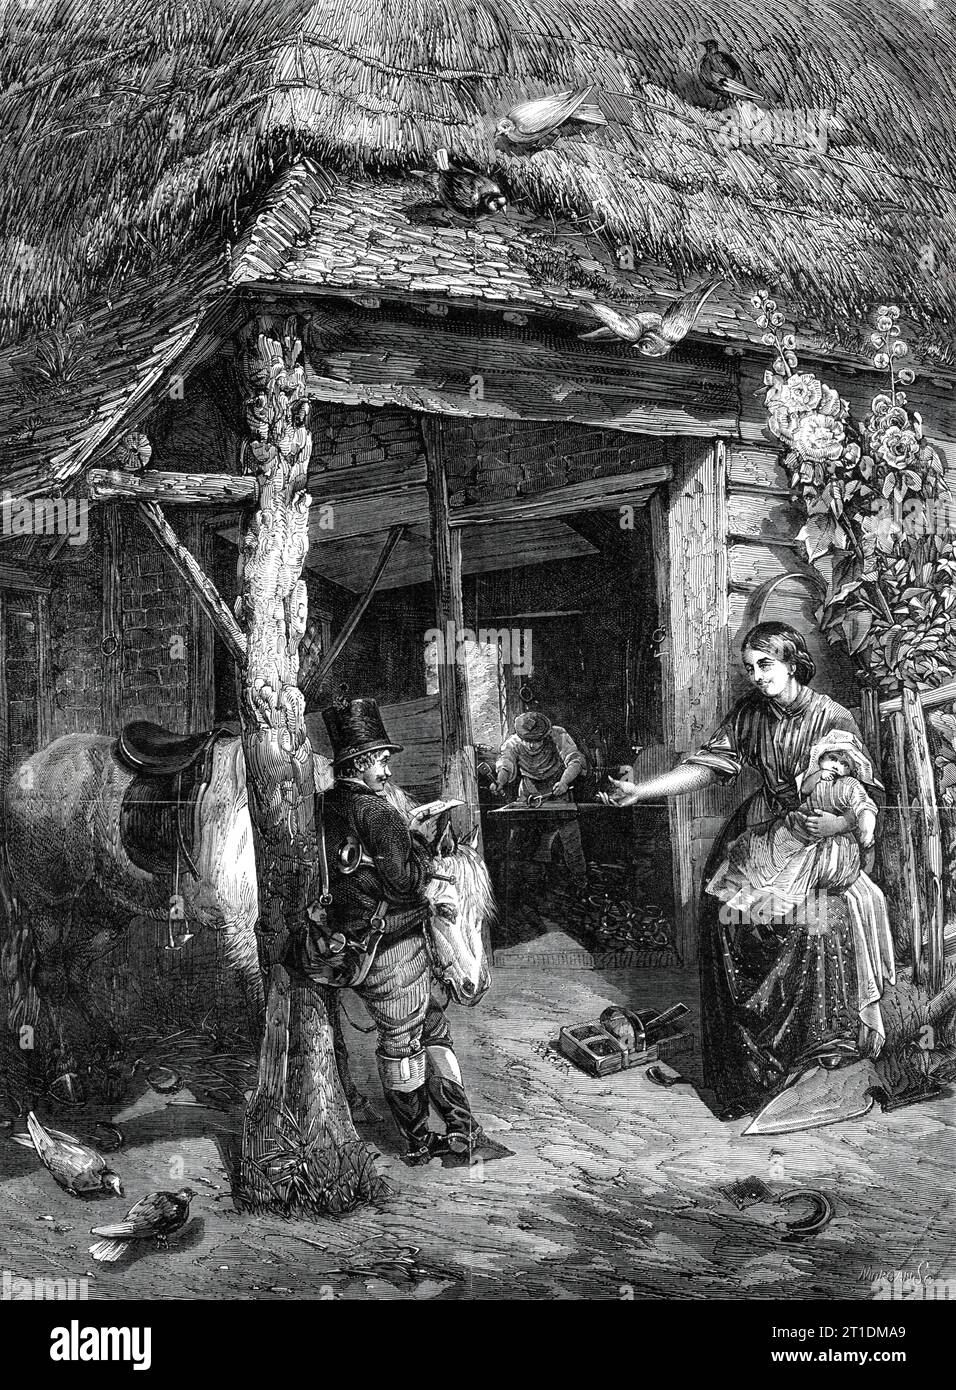 &quot;The Village Smithy&quot;, by Lewis, in the Crystal Palace Picture Gallery, 1860. 'This is just of the class of subject in which Mr. Lewis is always so much at home - a scene of ordinary every-day industry, with a little humorous incident of domestic life. The smithy, with all its appropriate furnishings, is painted with nice detail and commendable accuracy, and in a happy harmony of colour. In the foreground is a pleasant little scene between the postboy and a young girl for whom he has a letter, the purport of which, by his smirking face, he fancies himself to be aware of; whilst the yo Stock Photo